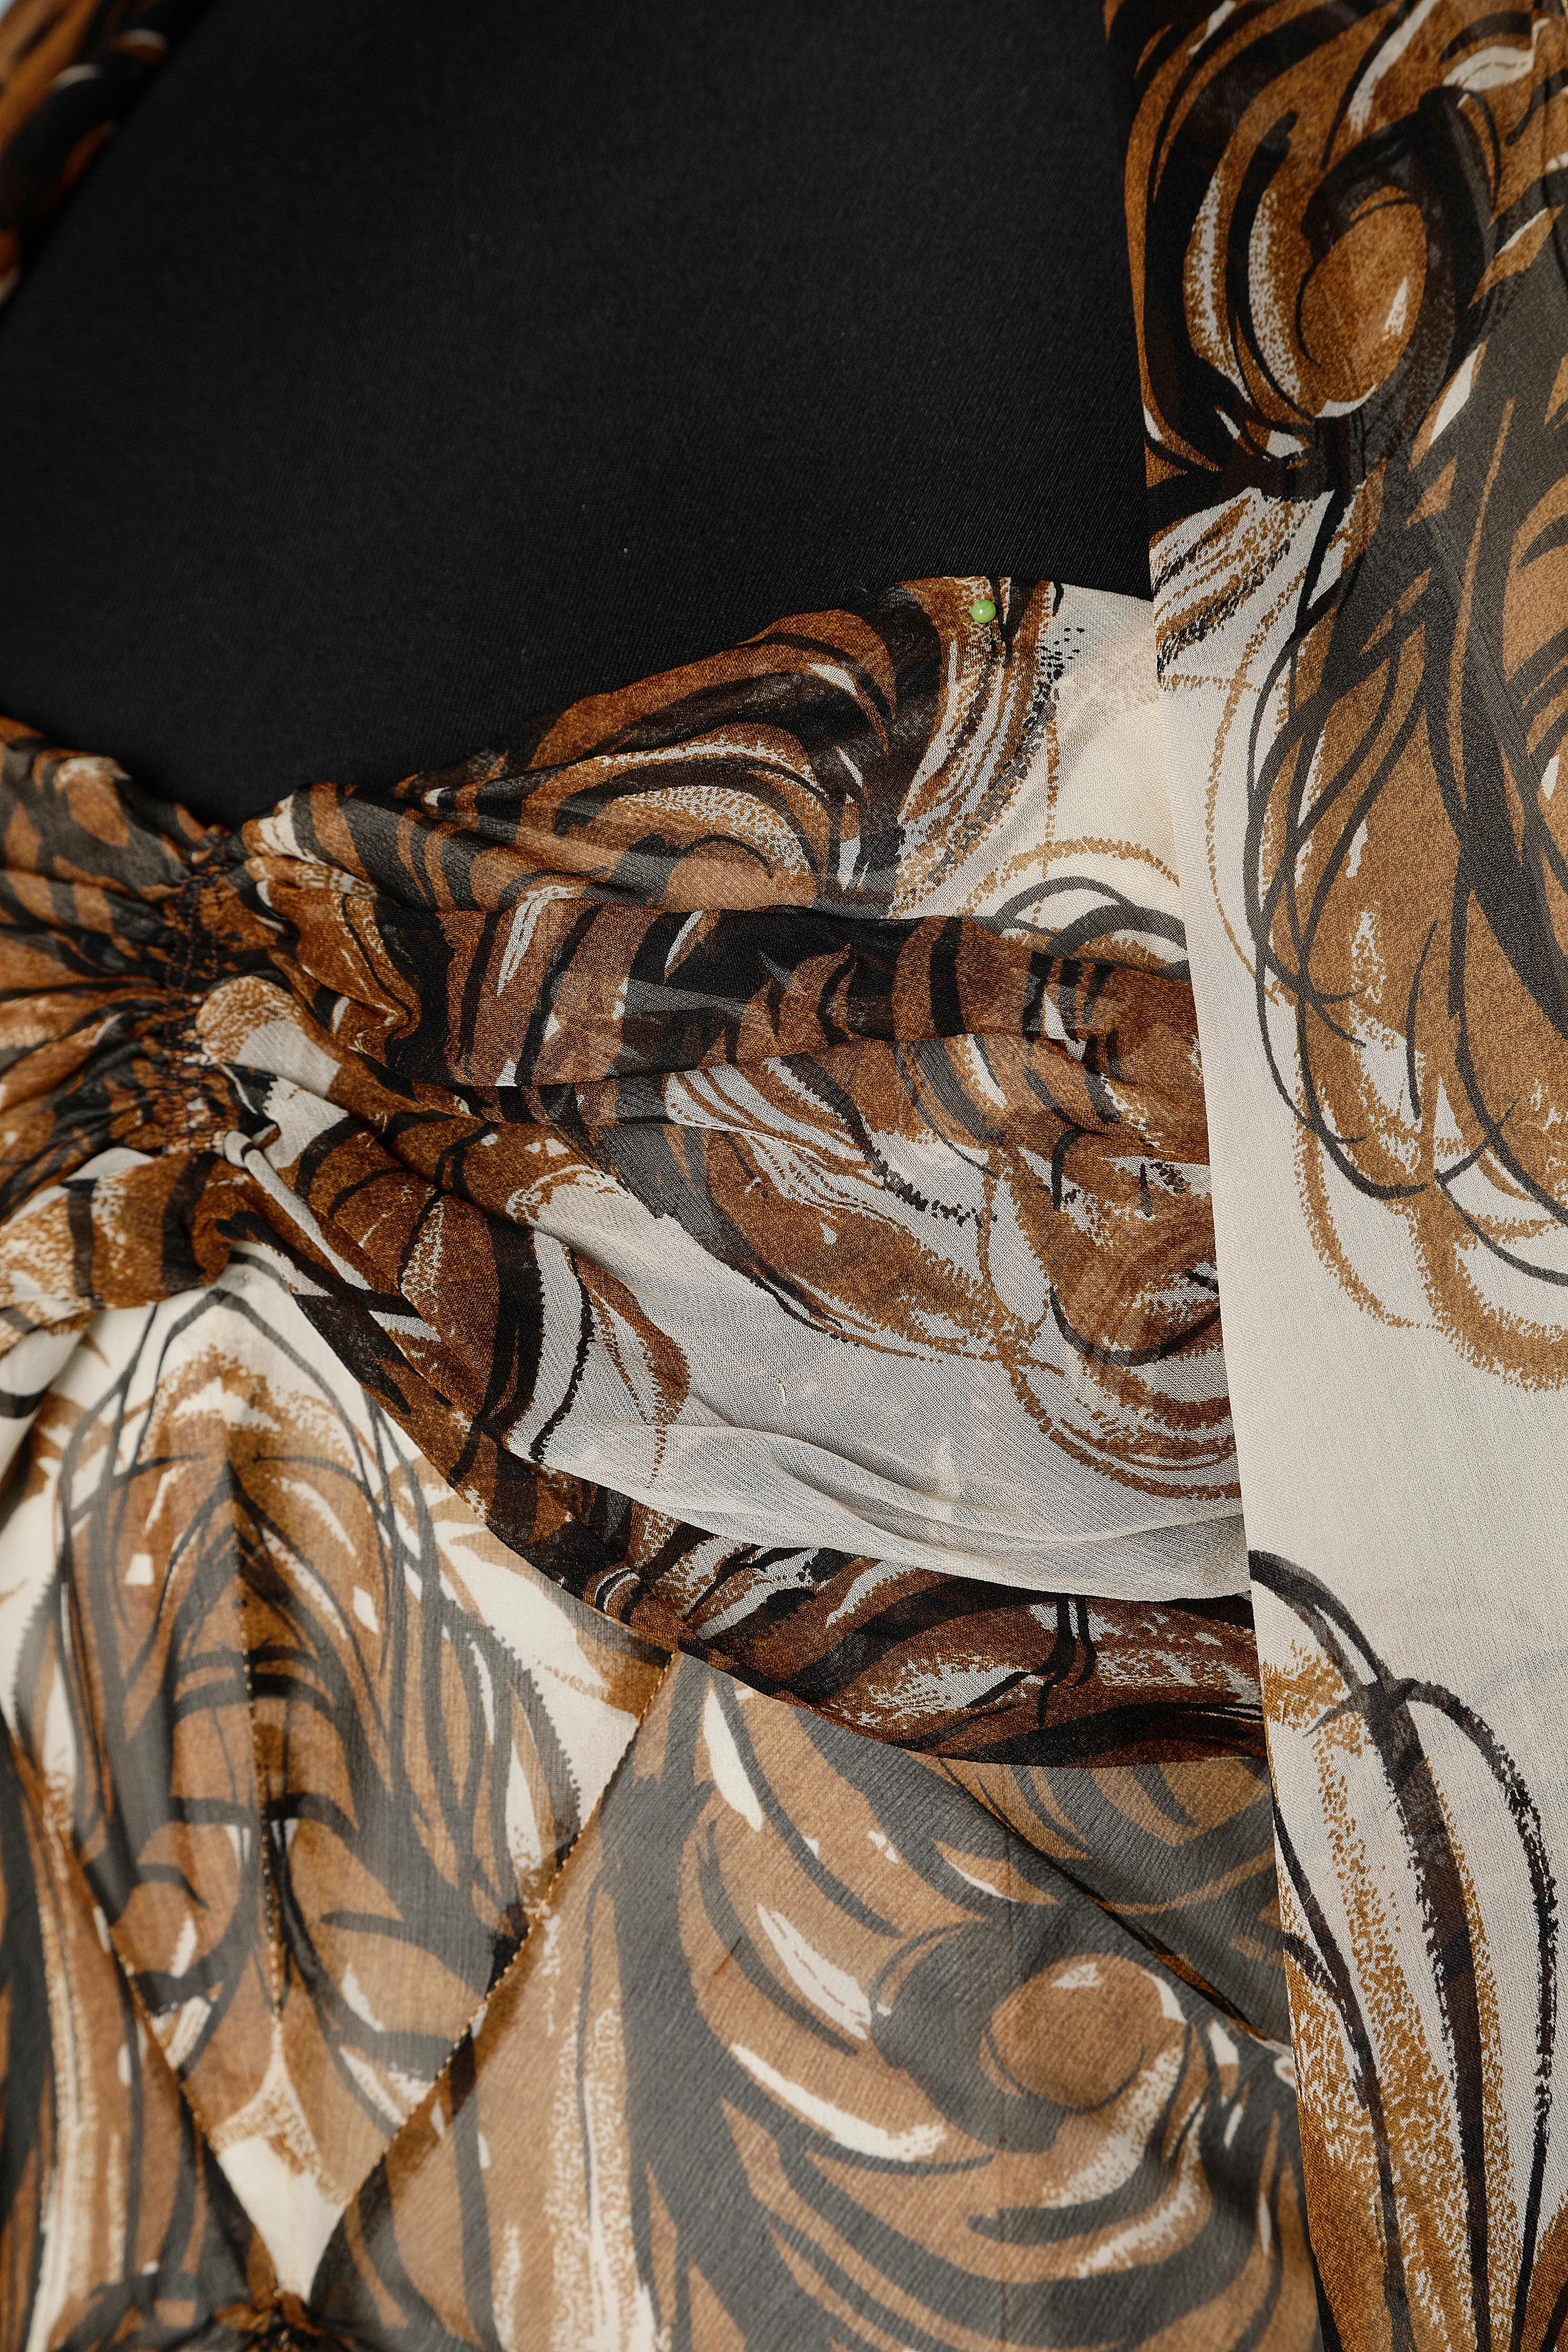 Silk, chiffon bustier evening dress with brown and black abstract print and scarf.
Zip in the middle back. Ivory crêpe lining.
Boned on the side of the bust and middle front.
SIZE S